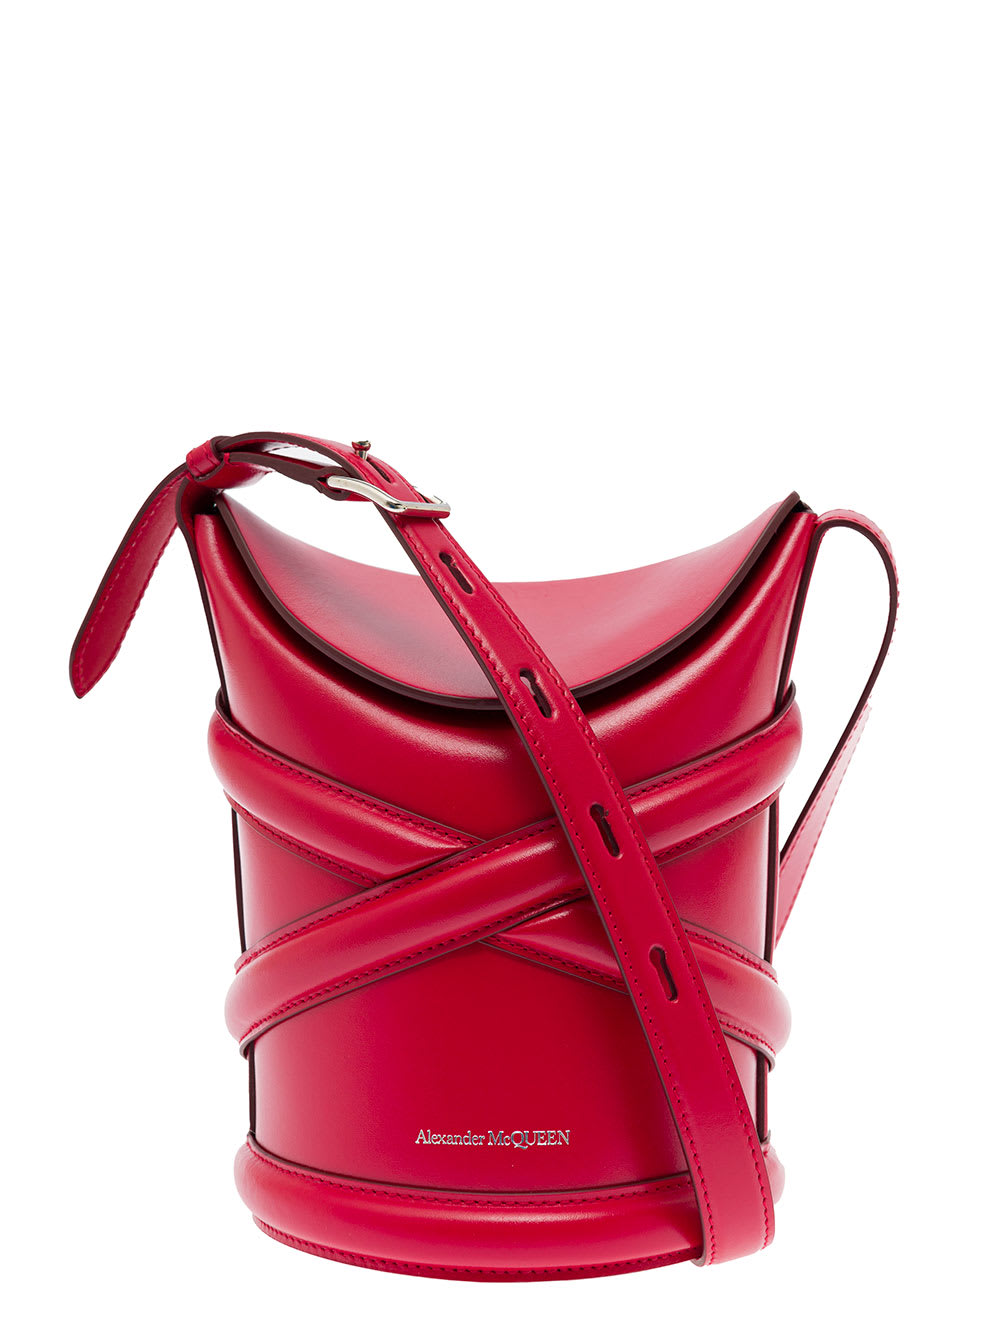 Alexander McQueen Womans The Curve Small Red Leather Crossbody Bag